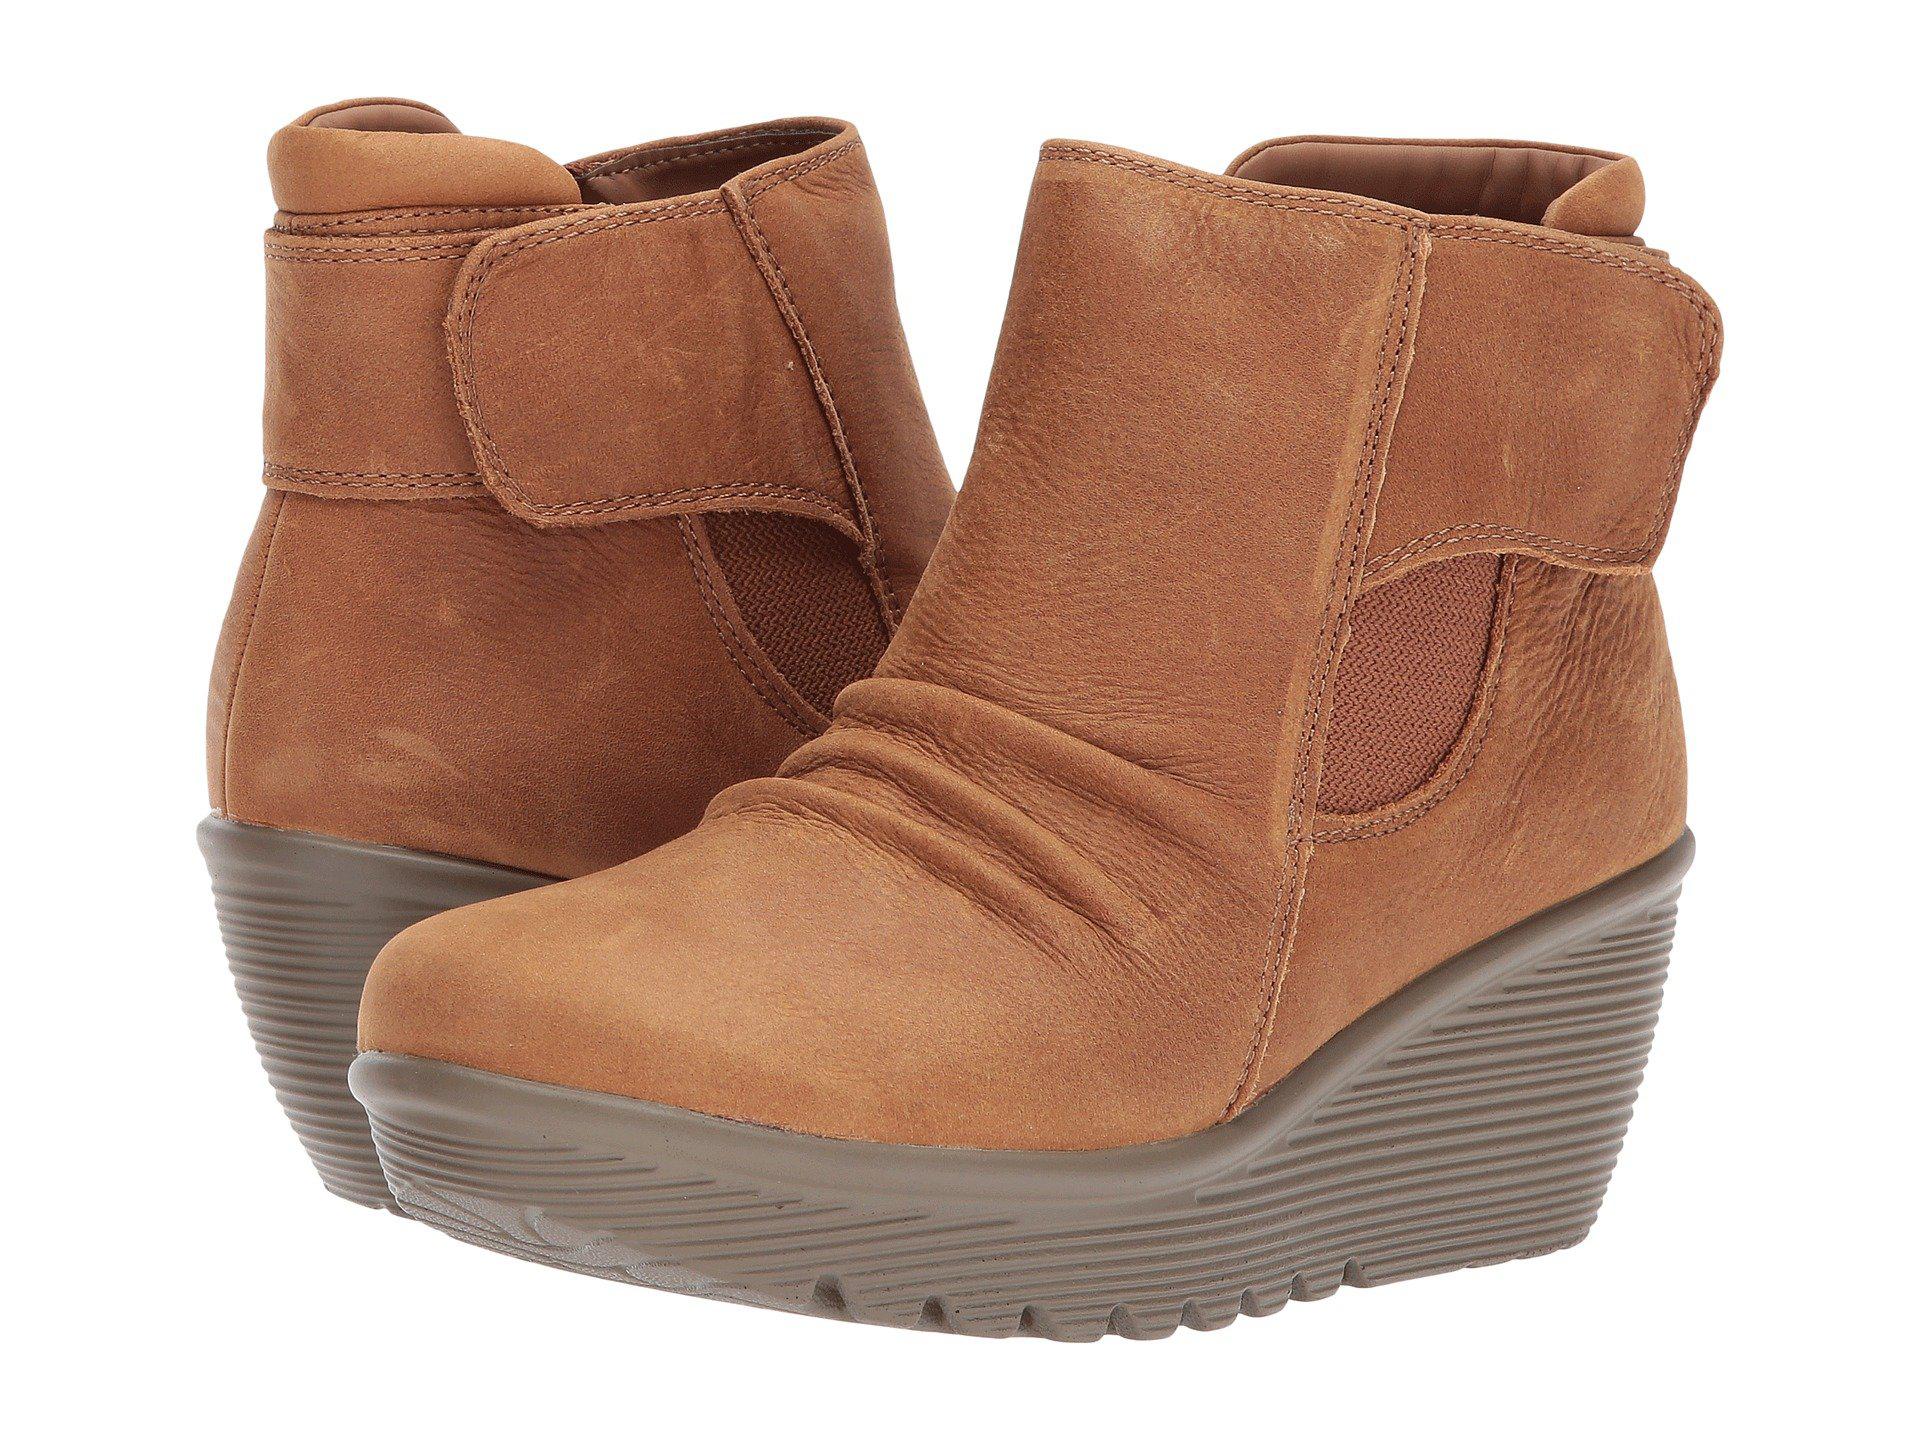 Skechers Parallel Ankle Boots Netherlands, SAVE 30% - online-pmo.com